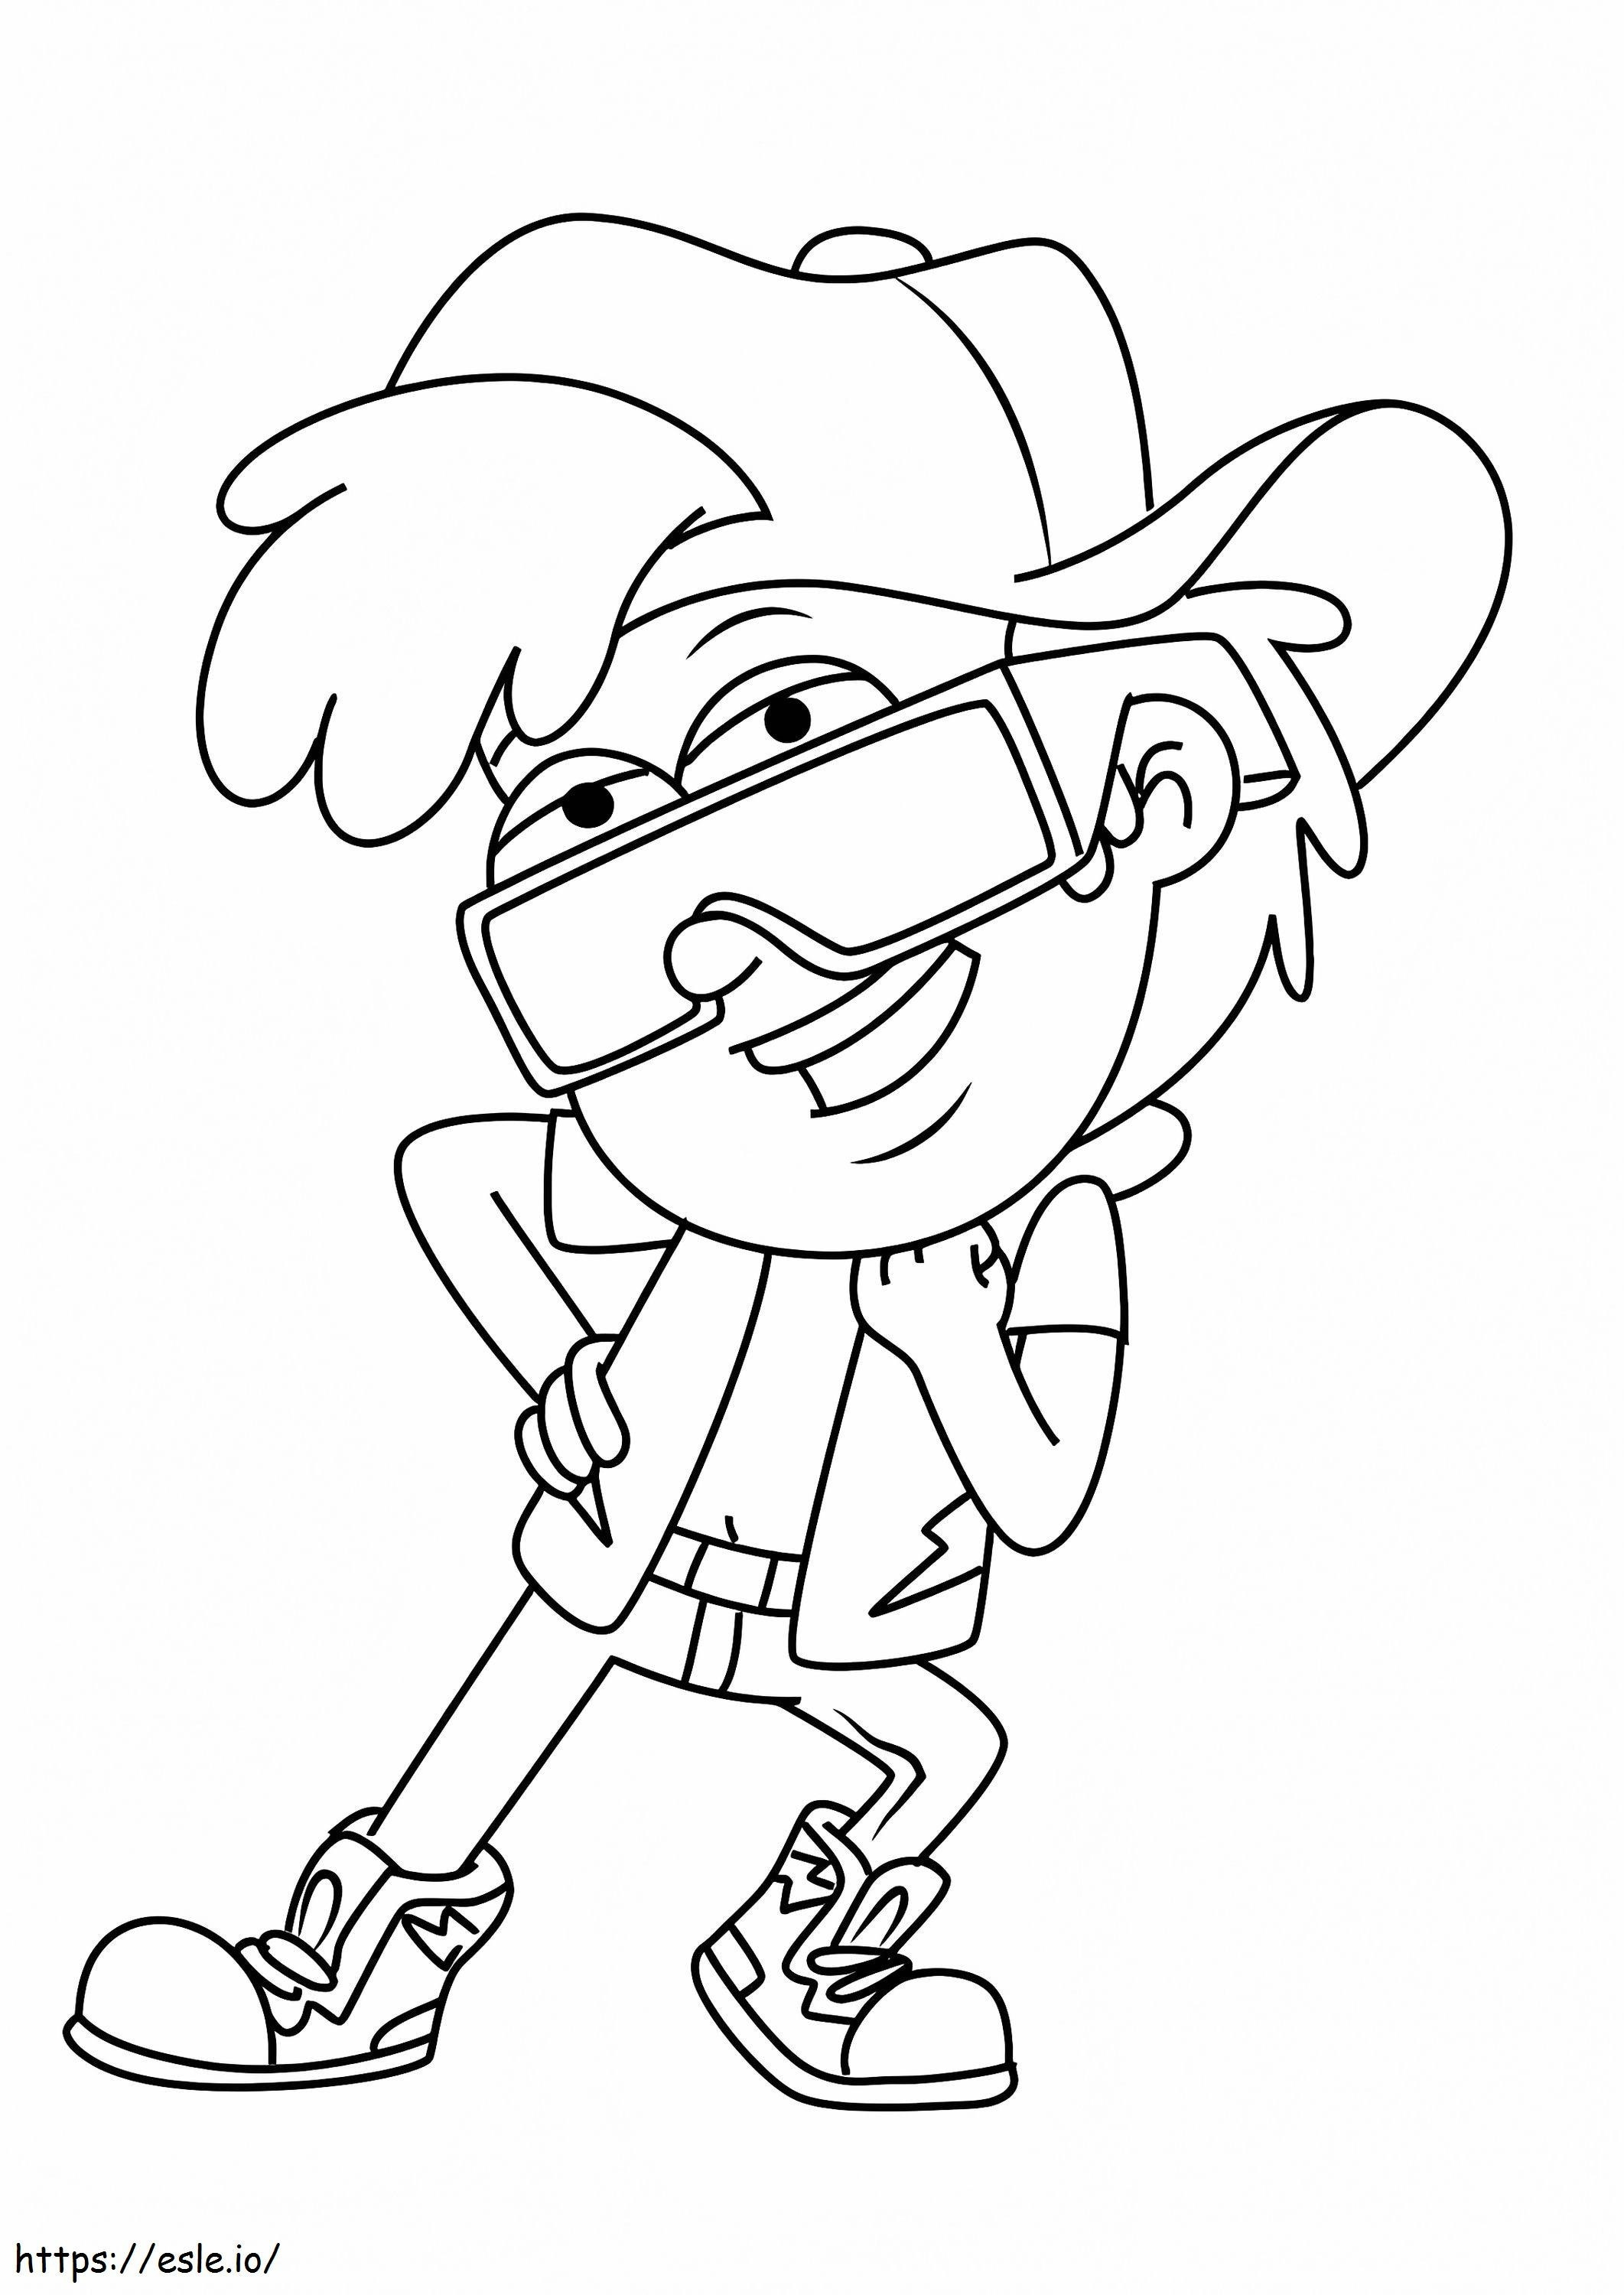 How To Draw Dippy Fresh From Gravity Falls Step 0 coloring page